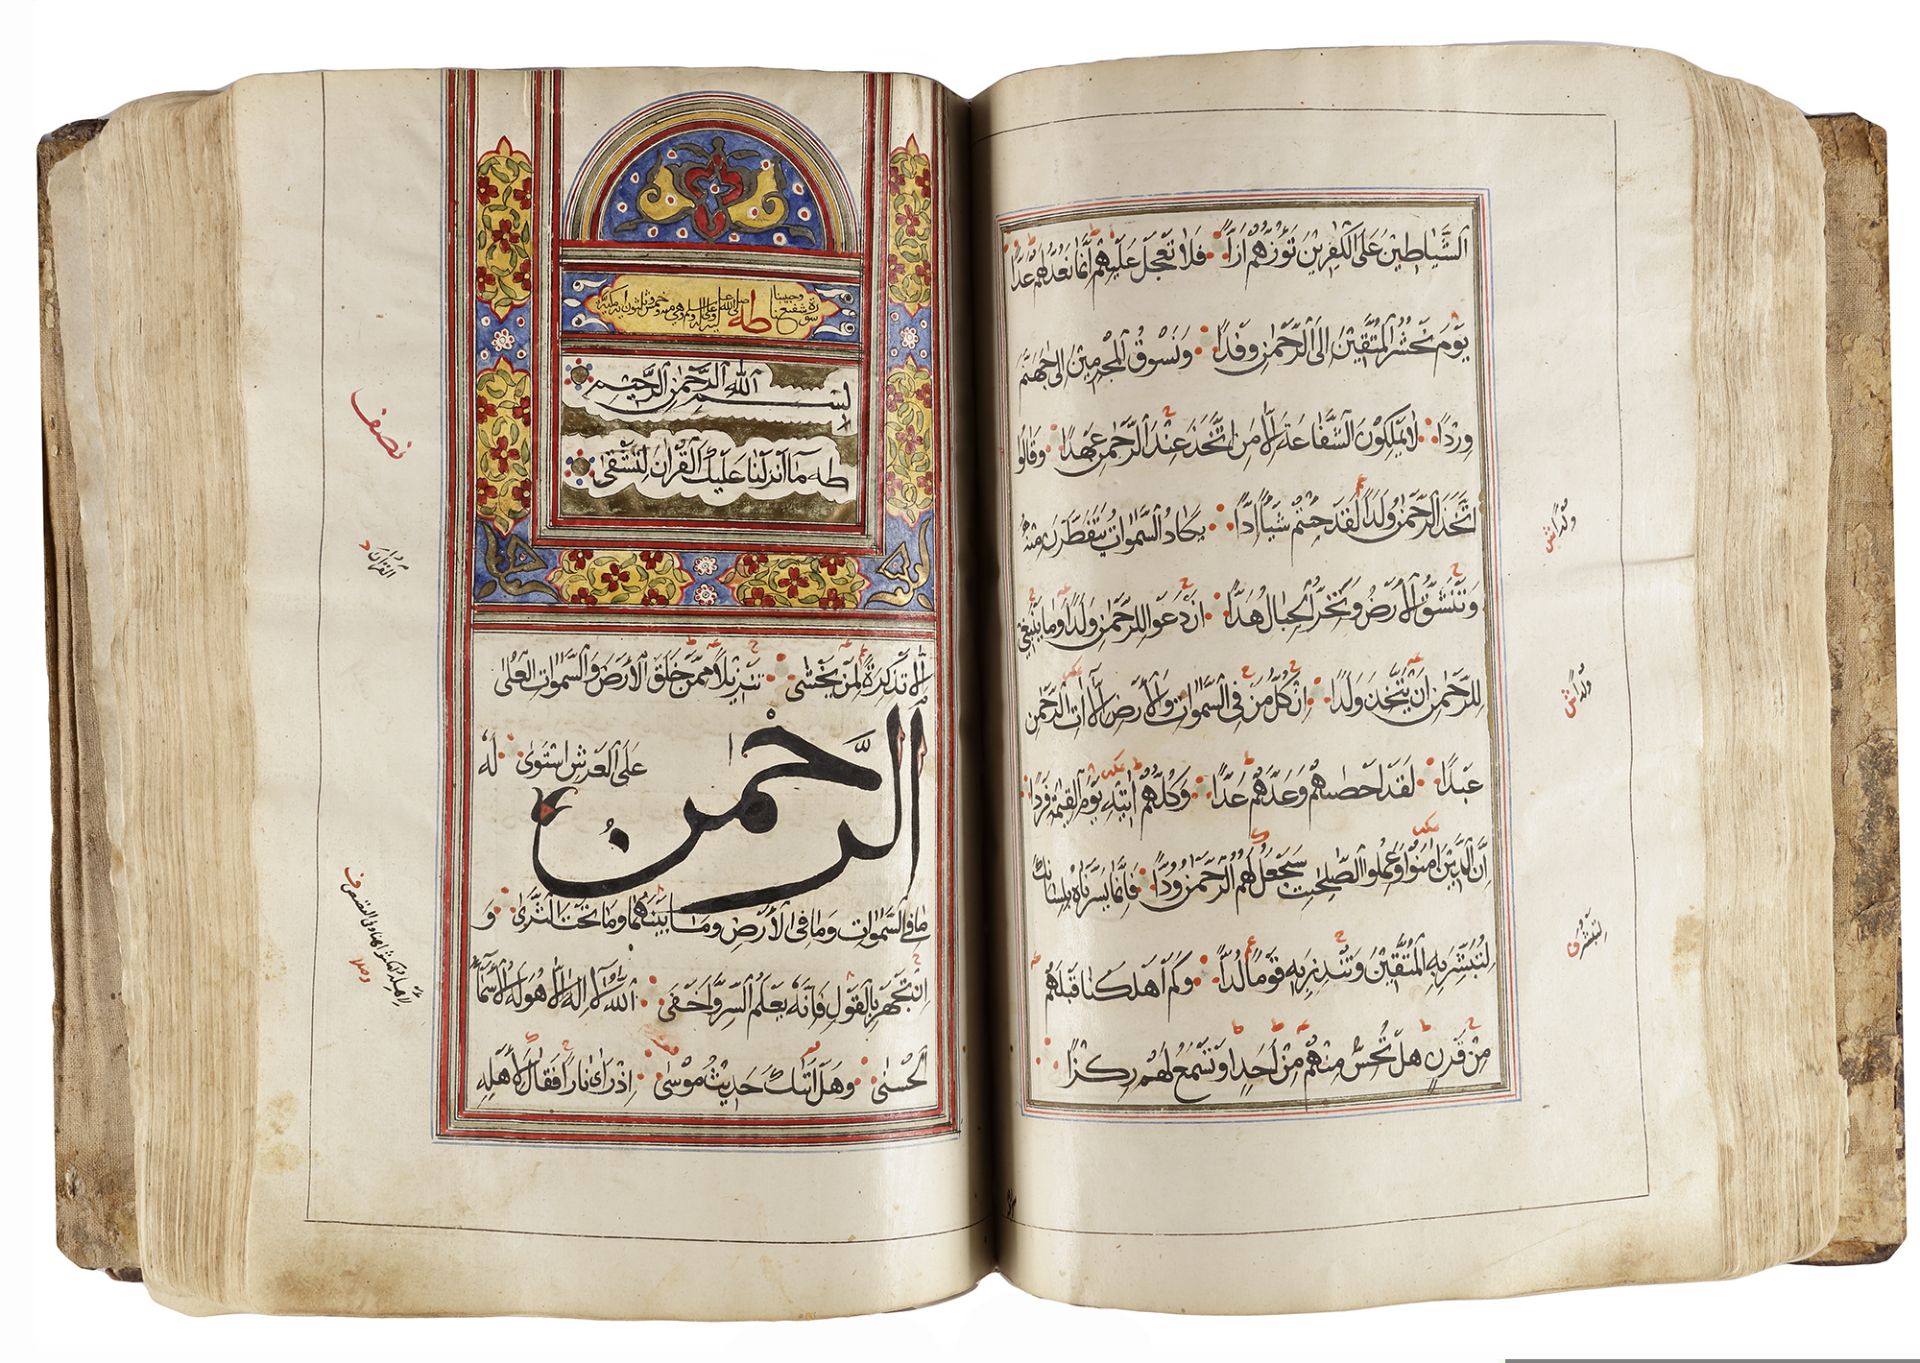 AN ILLUMINATED QURAN, YEMEN, BY AHMED QASEM IBN ISMAIL IN 1035 AH/1626 AD - Image 15 of 18